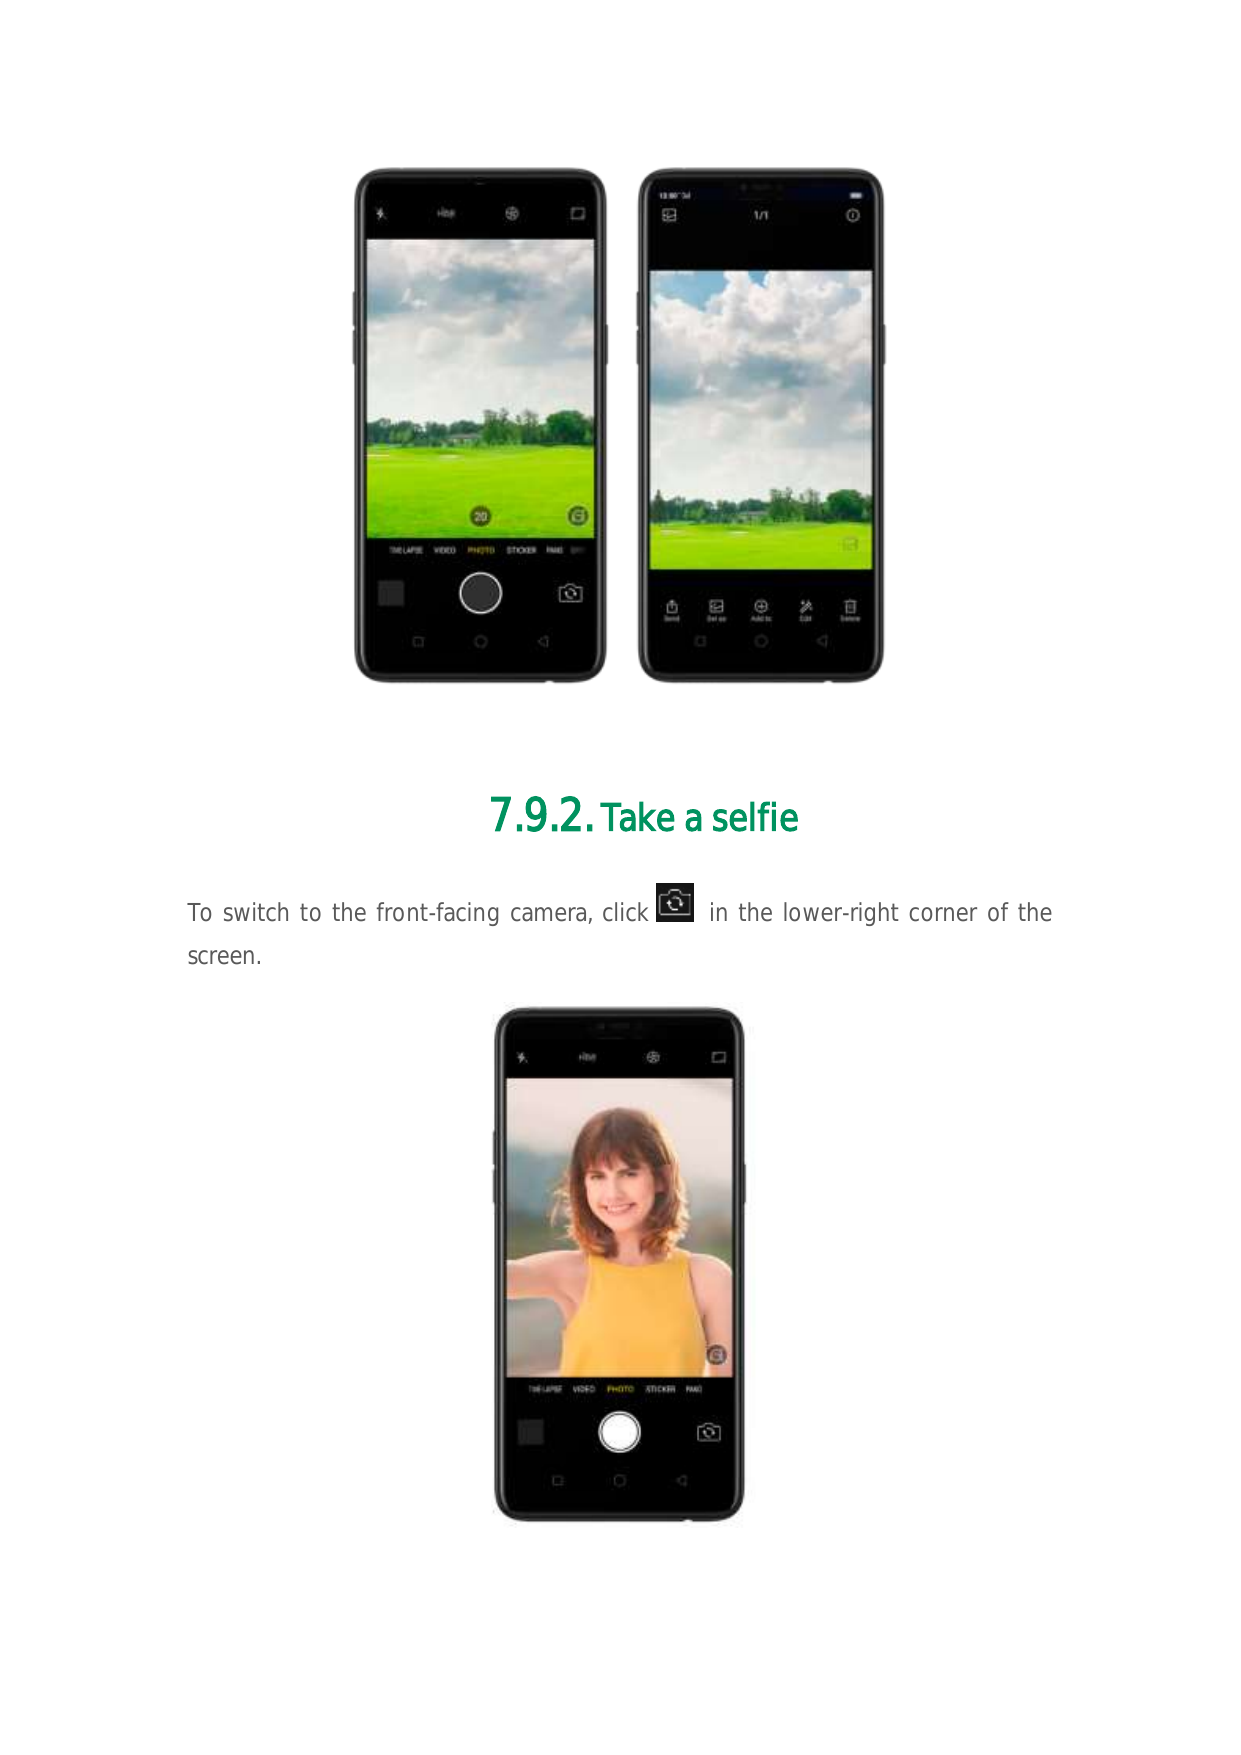 7.9.2. Take a selfieTo switch to the front-facing camera, clickscreen.in the lower-right corner of the